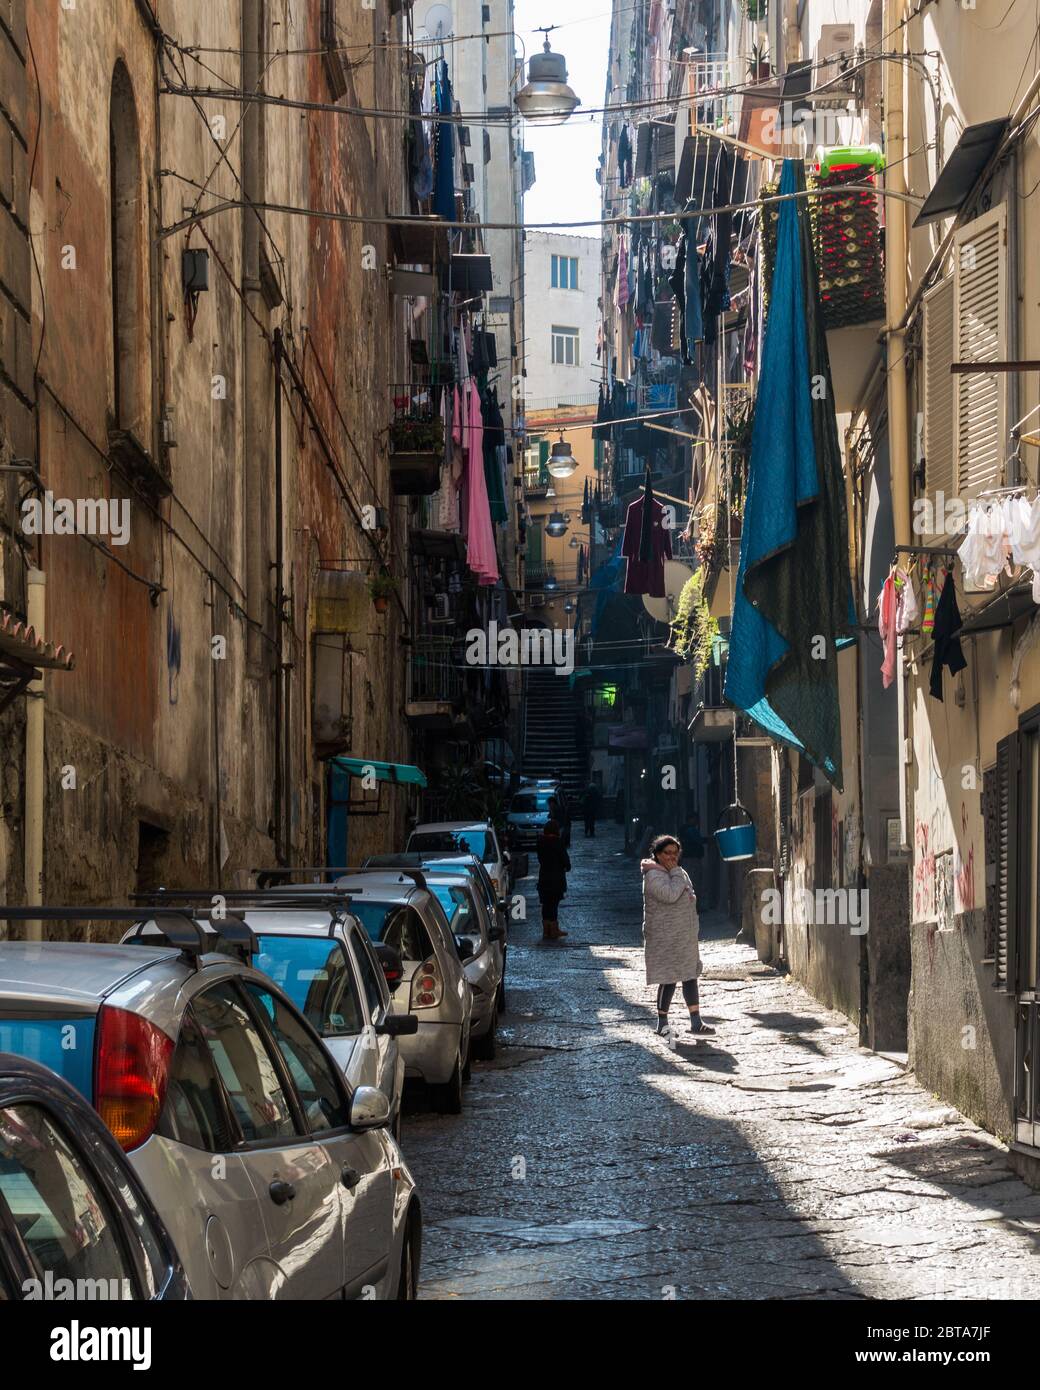 Naples, Italy, February 8, 2020 – A typical pedestrian street of Rione Sanità with clothes hanging from the balconies to dry Stock Photo